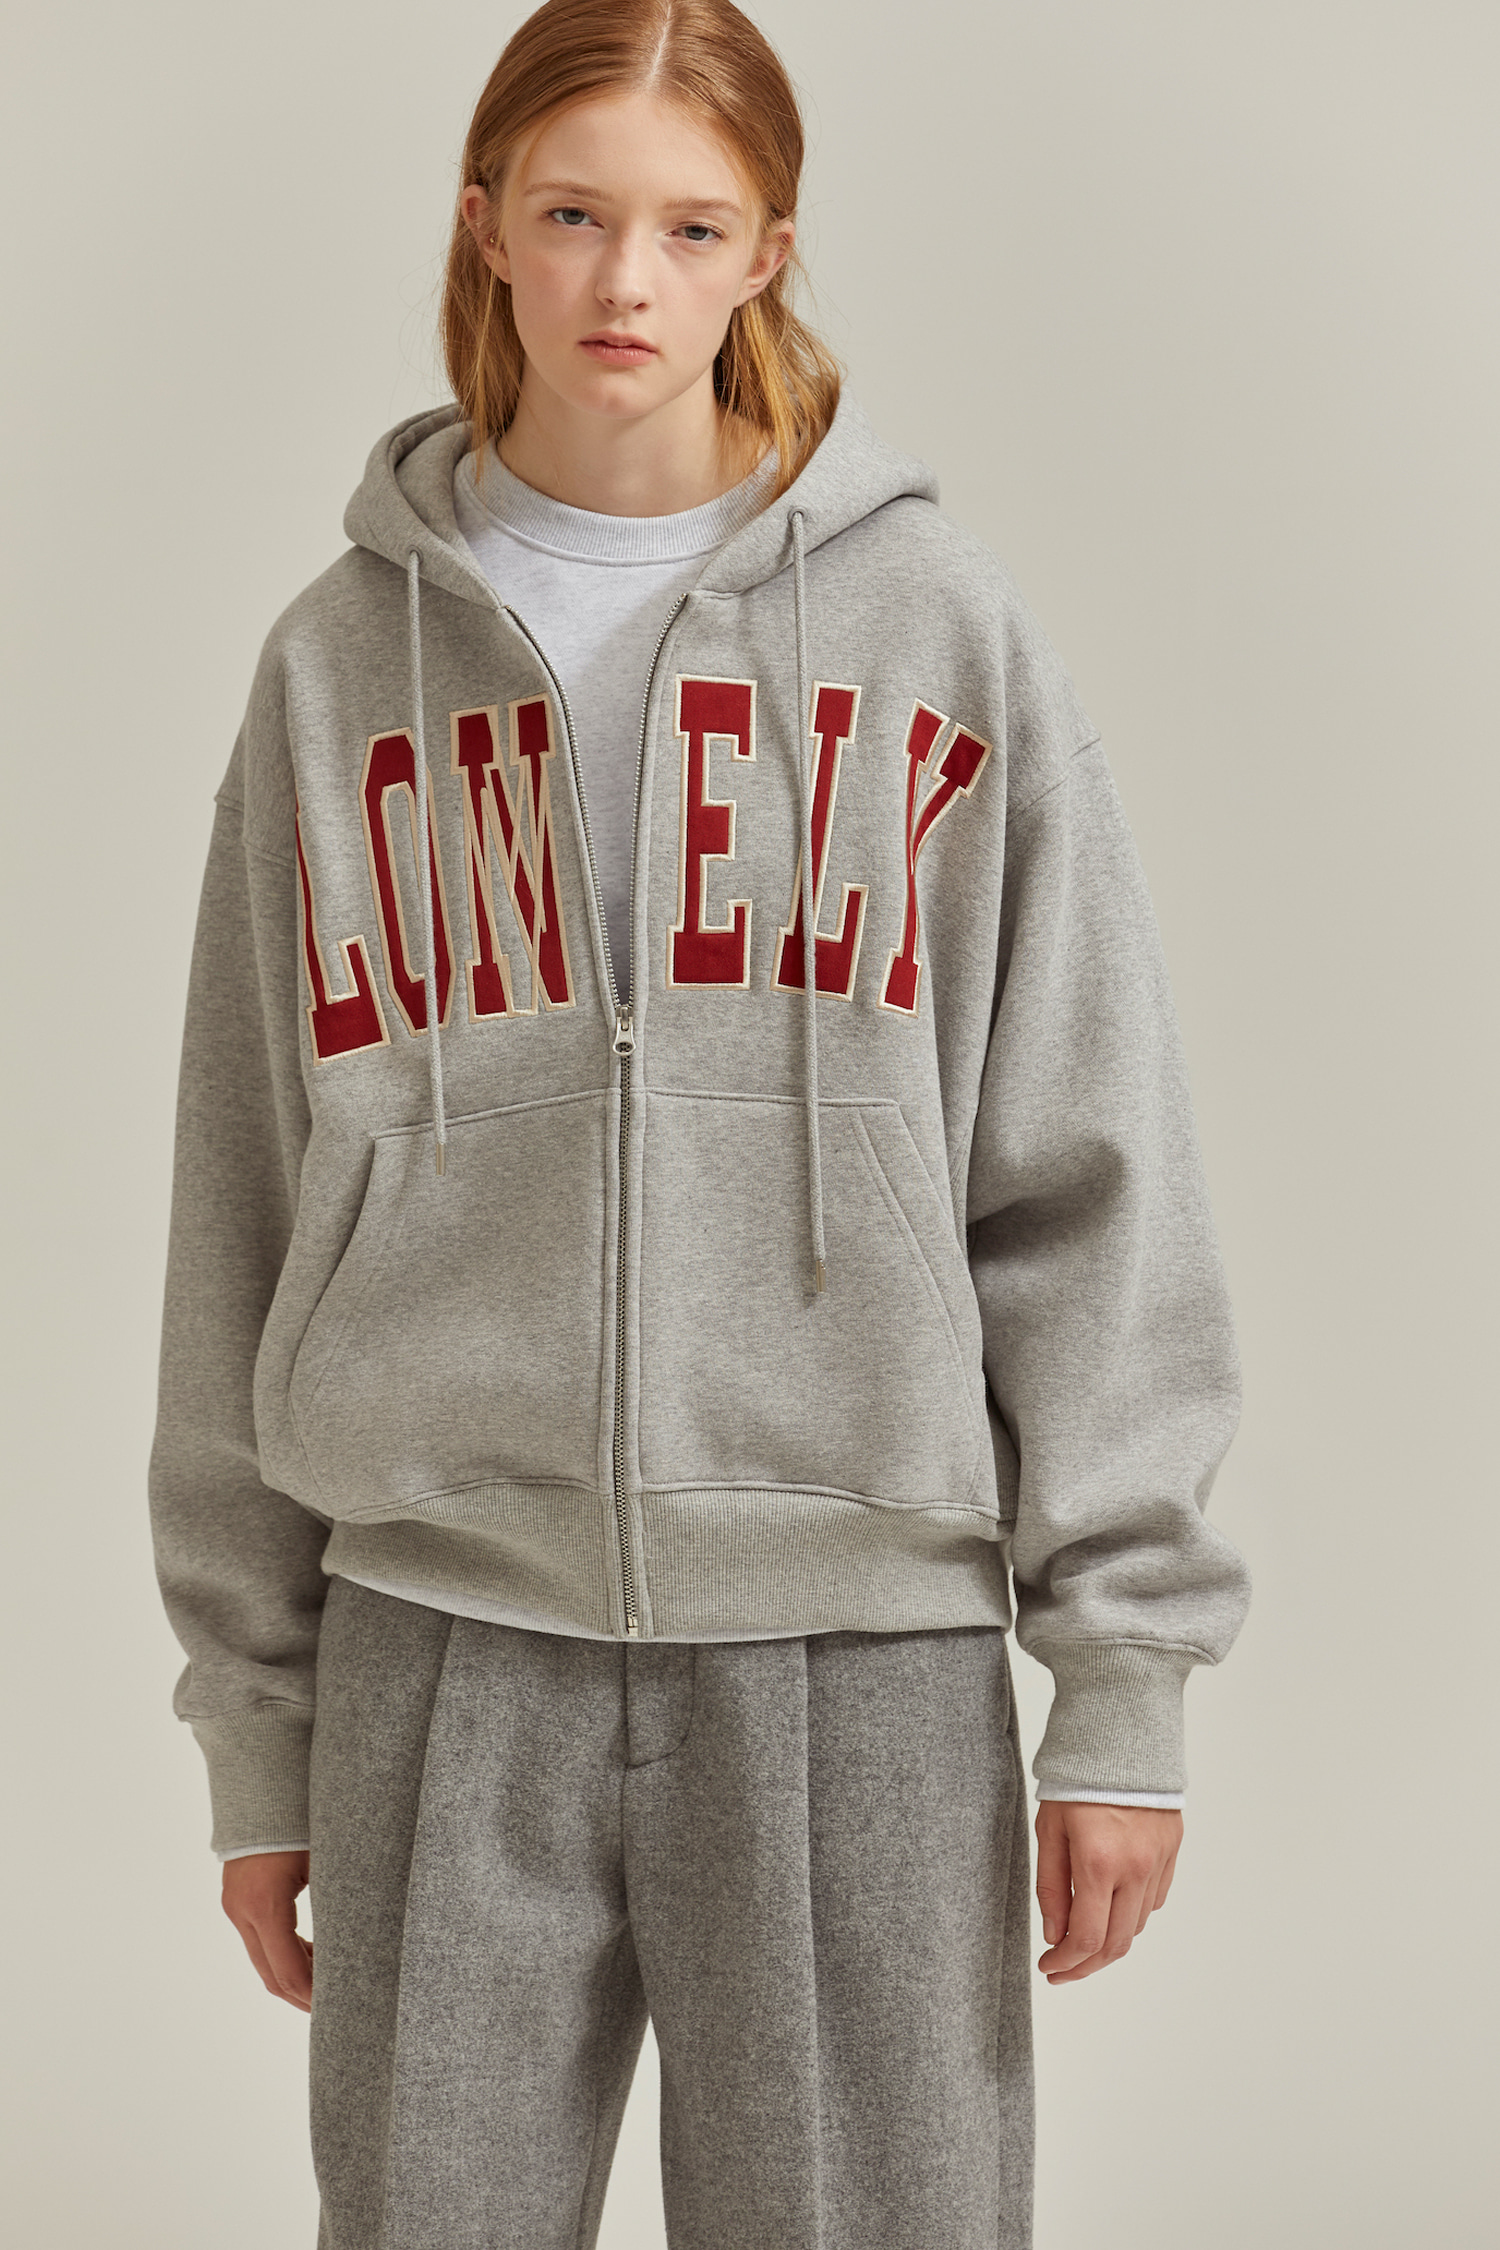 LONELY/LOVELY HOODIE ZIP-UP GRAY